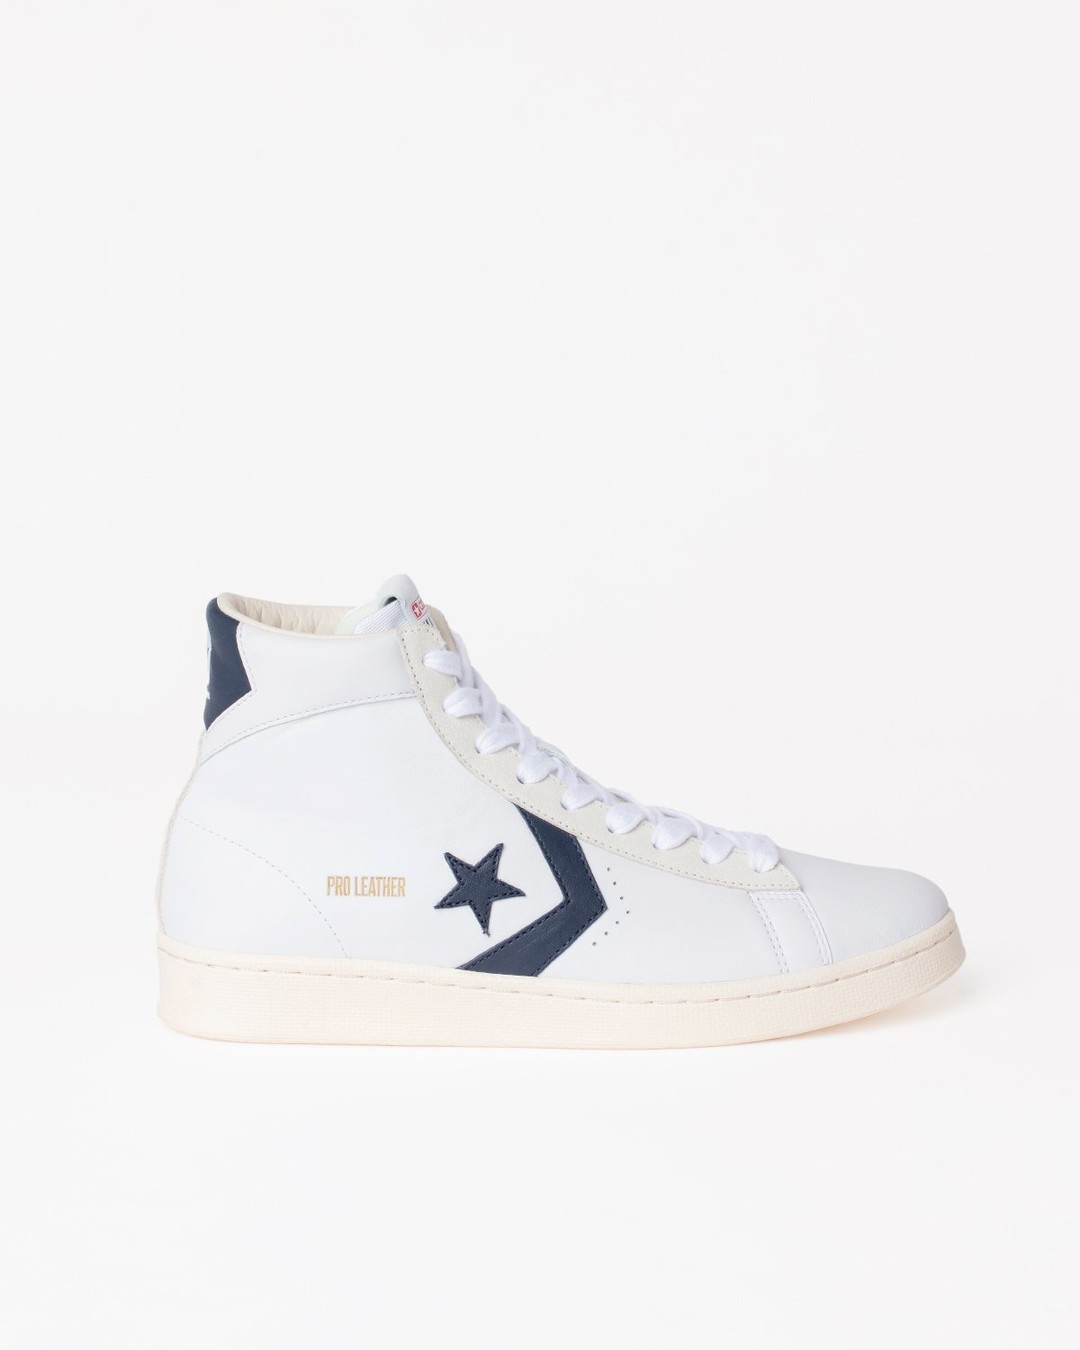 Converse – Pro Leather OG Mid White/Obsidian/Egret - Sneakers - White - Image 1